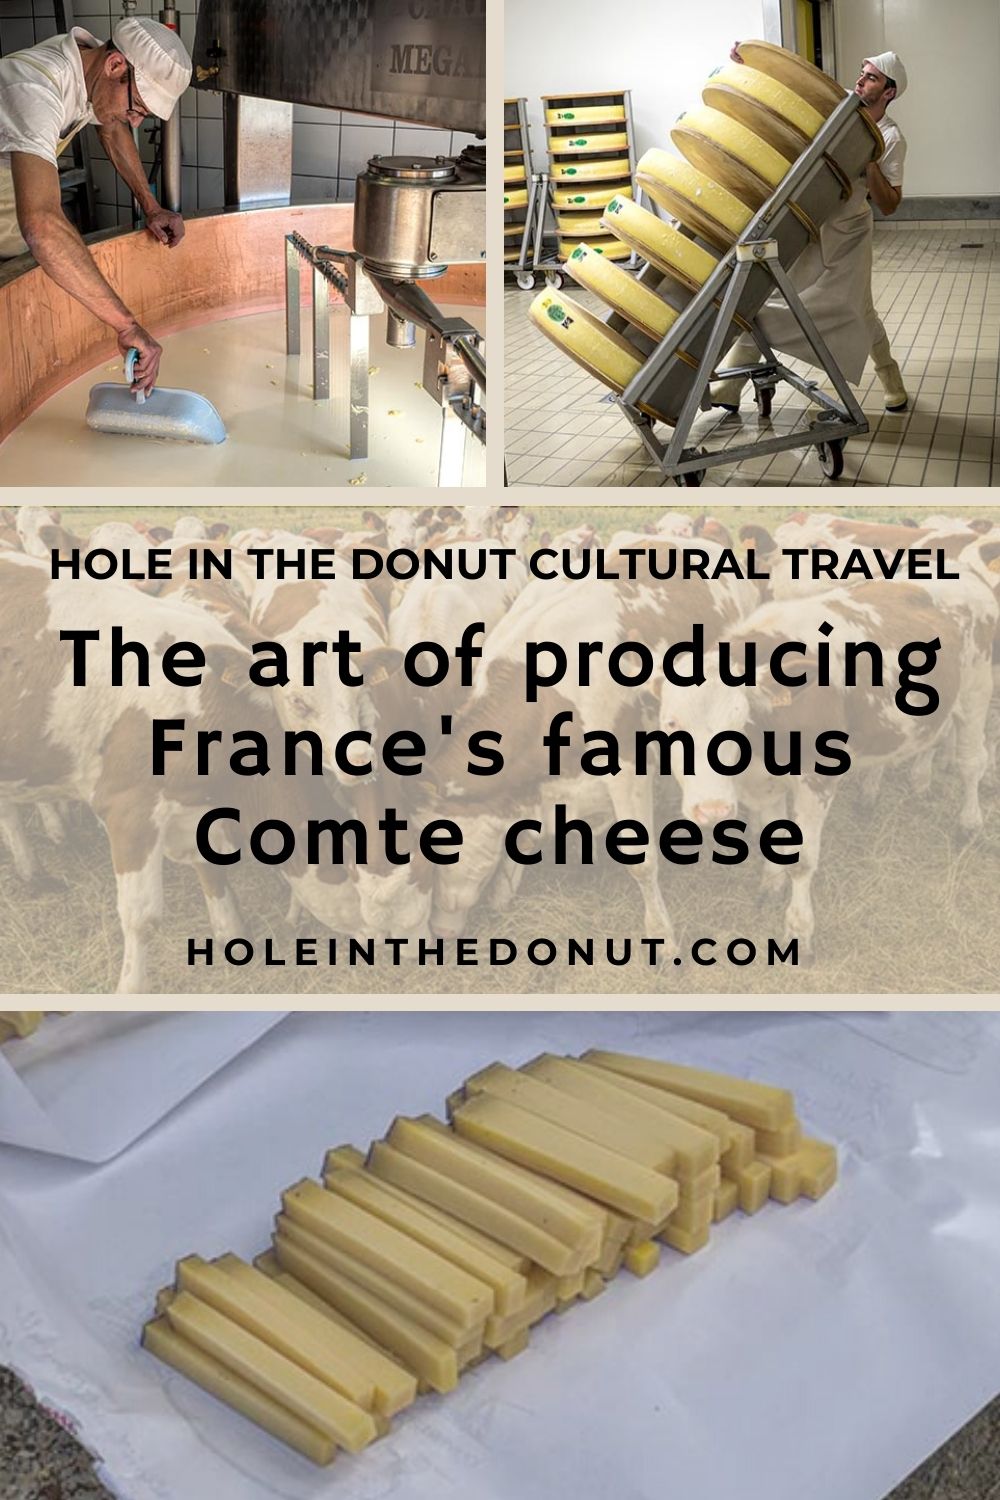 From Farm to Table - the Art of Producing France’s Famous Comte Cheese